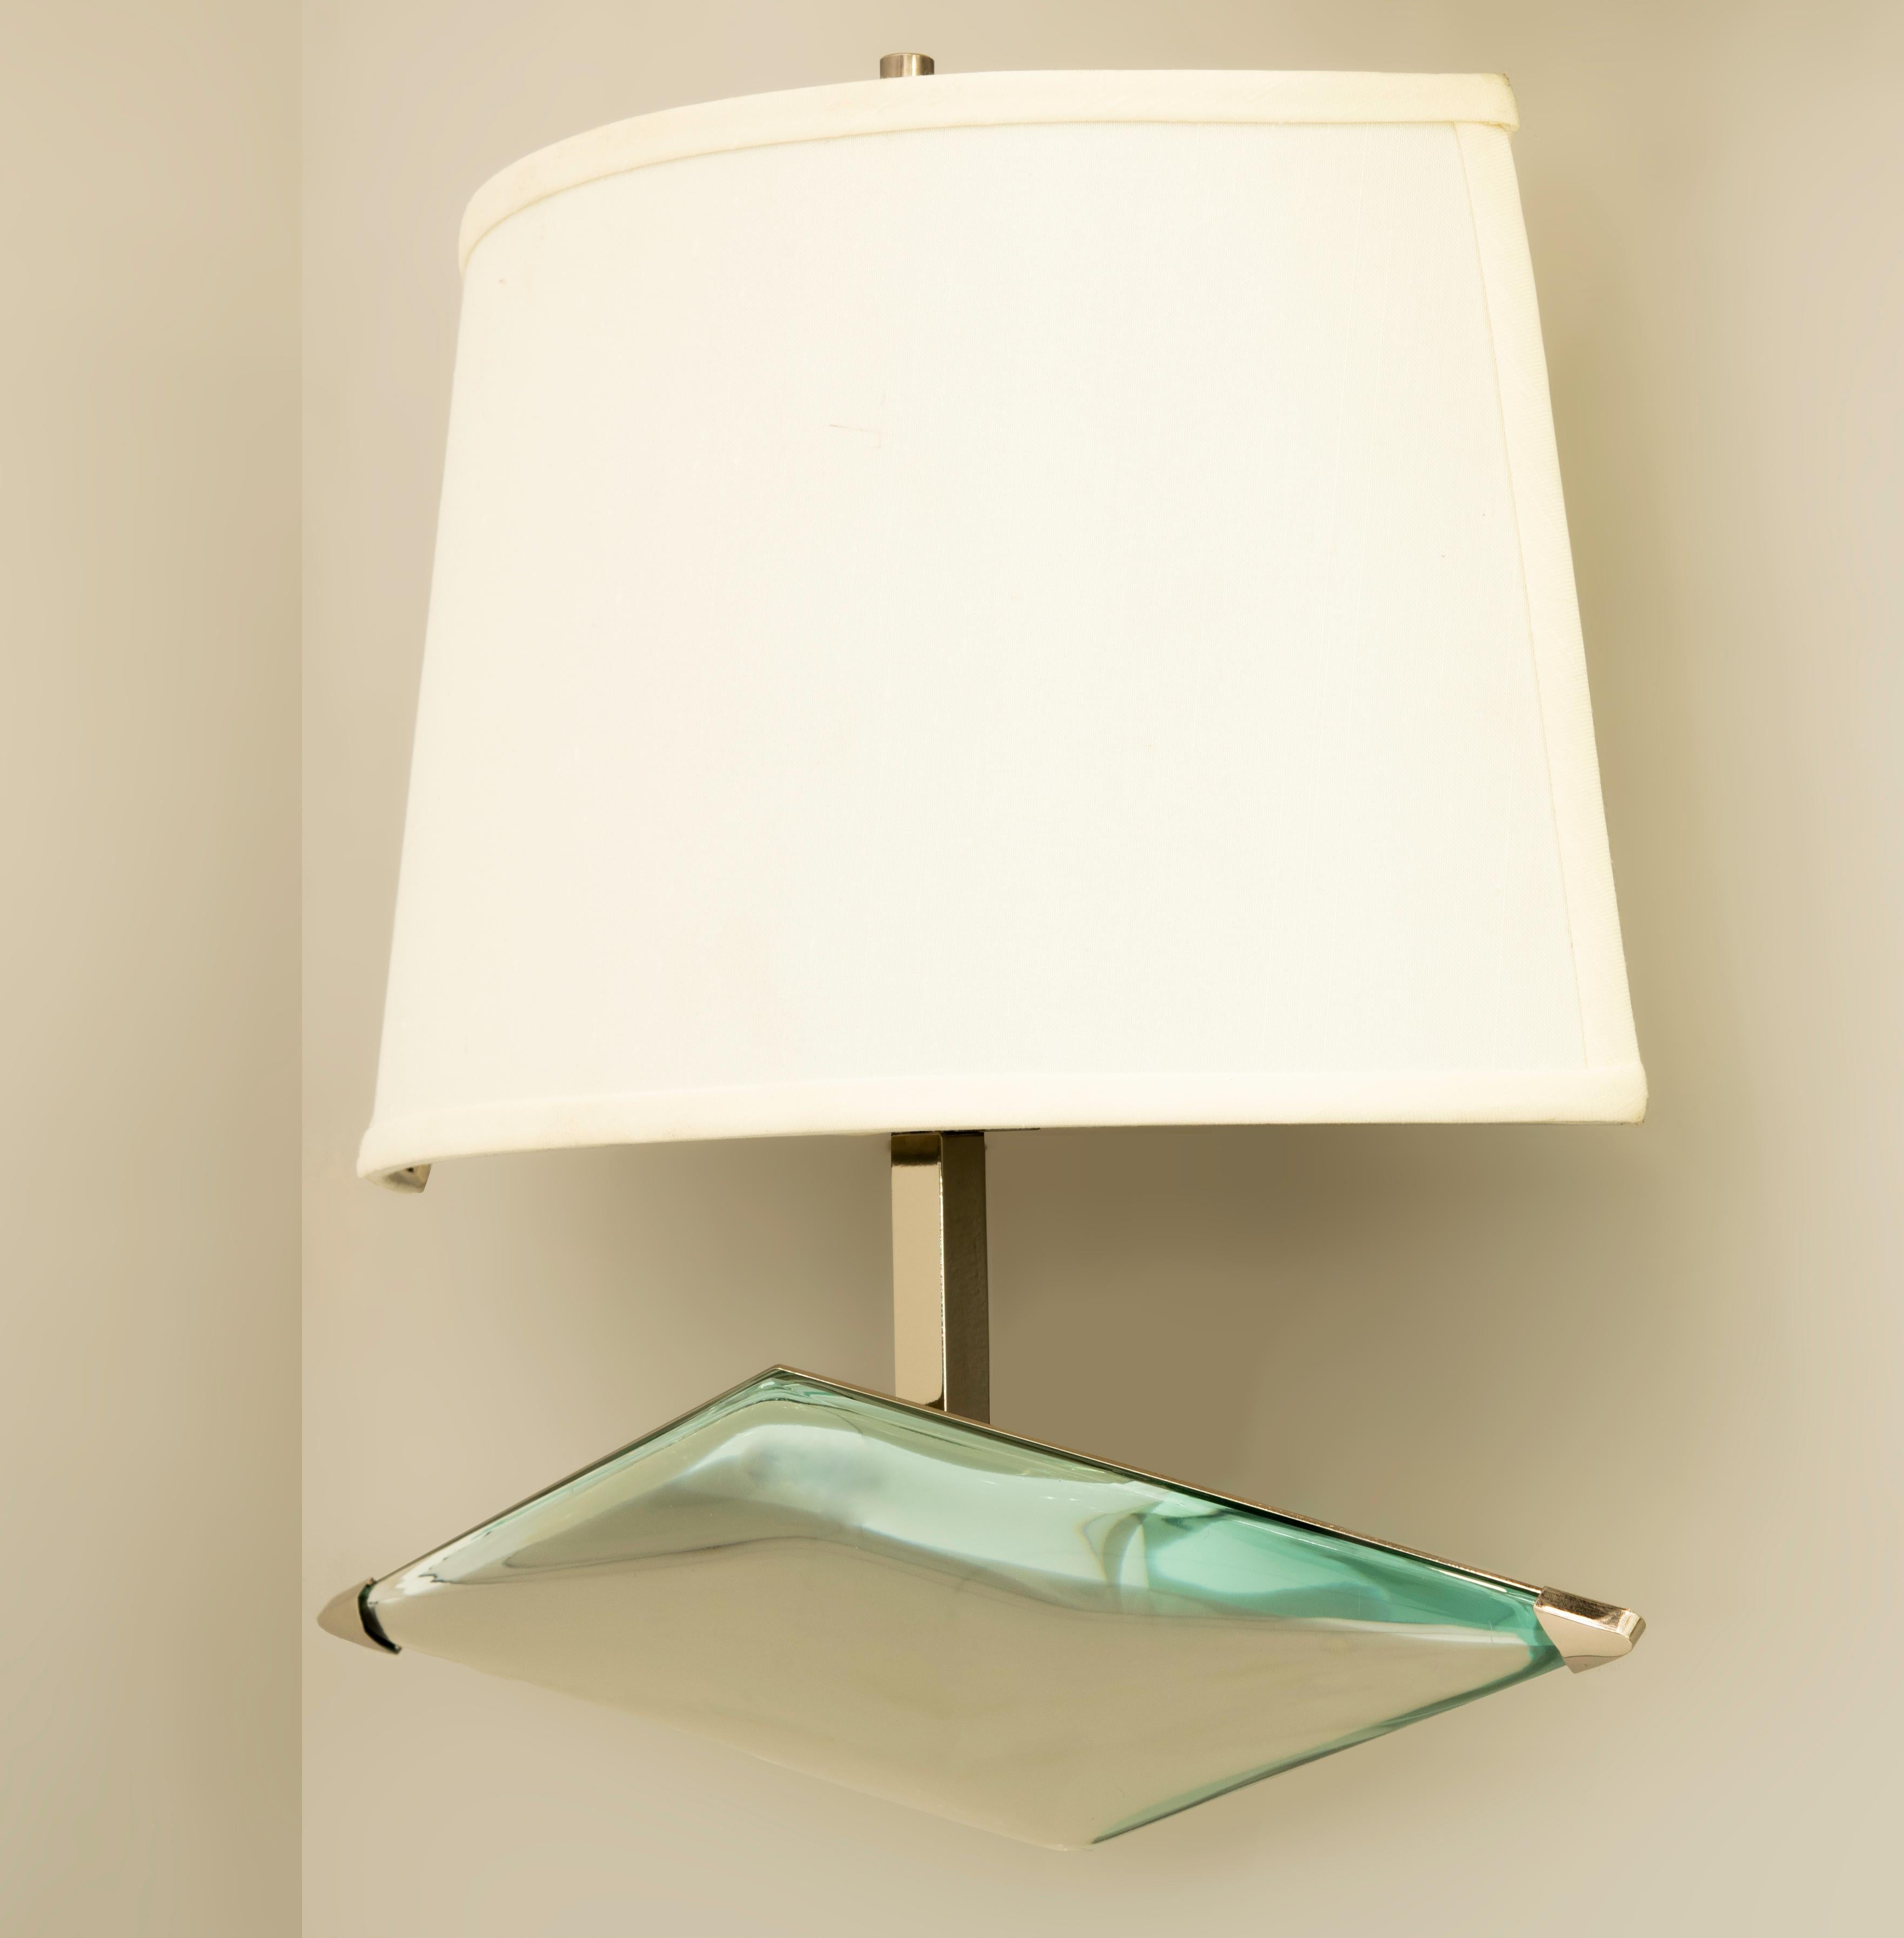 The Rombo wall light by form A is designed around a thick starphire glass which has been hand carved in the shape of rhombus. Mounted on a sloping frame ending with a frosted glass or silk shade. Shown in polished nickel with a silk